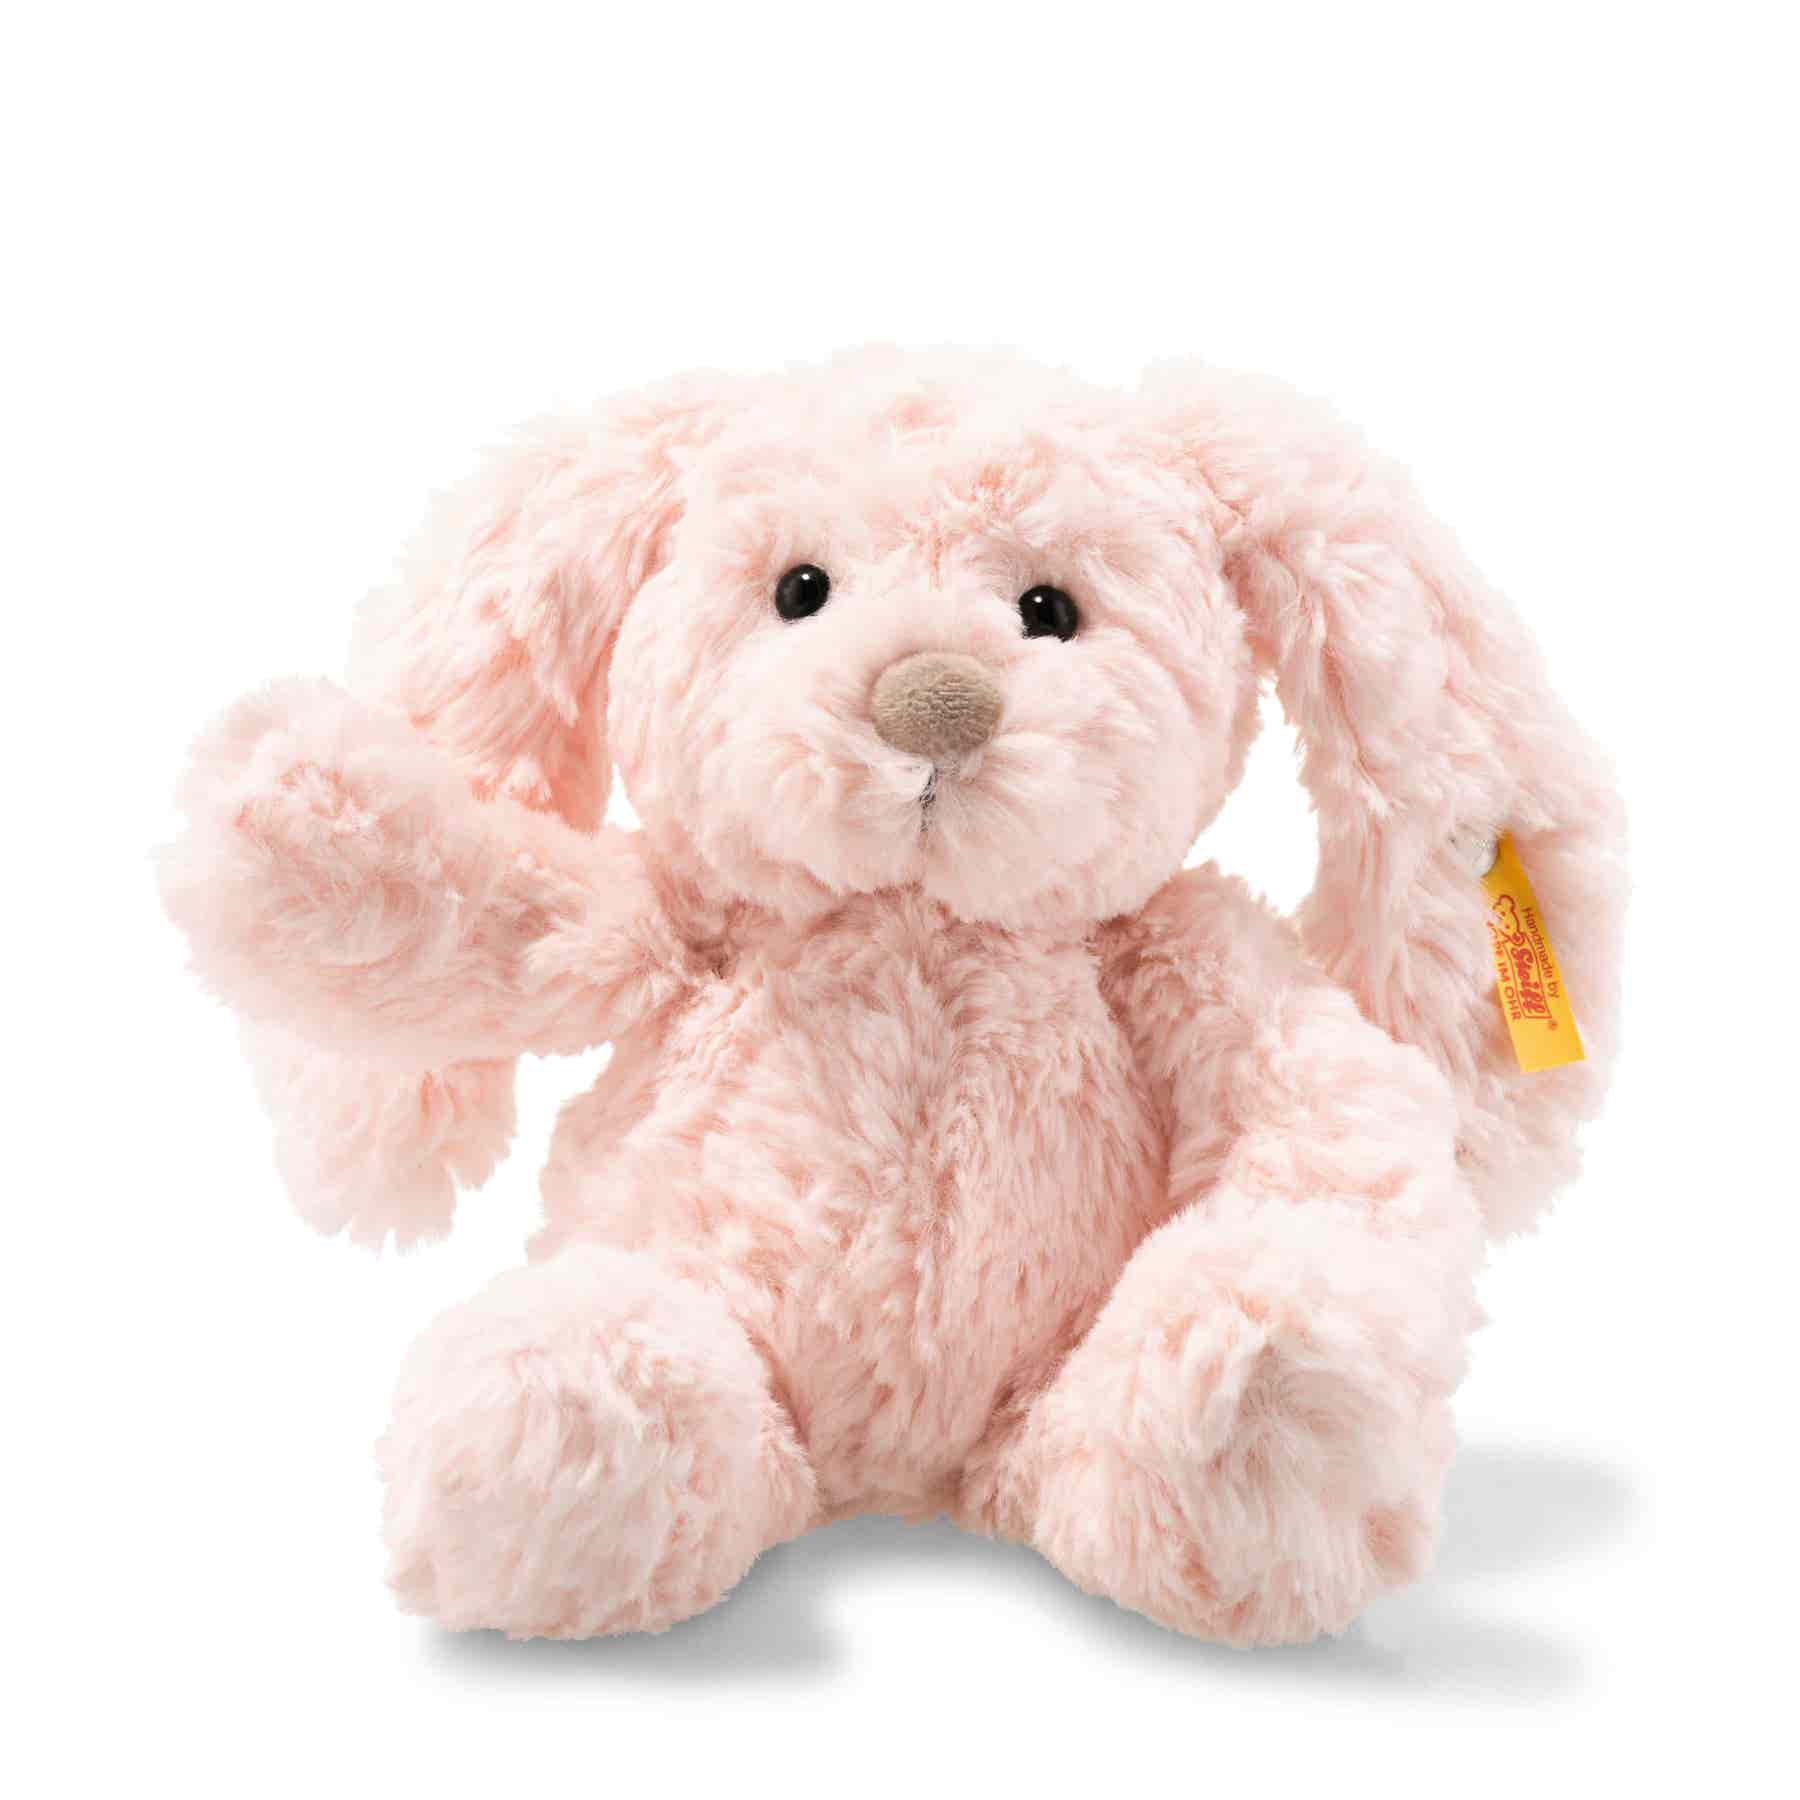 This cute pink bunny is made of soft cuddly plush, with a soft nose and floppy ears